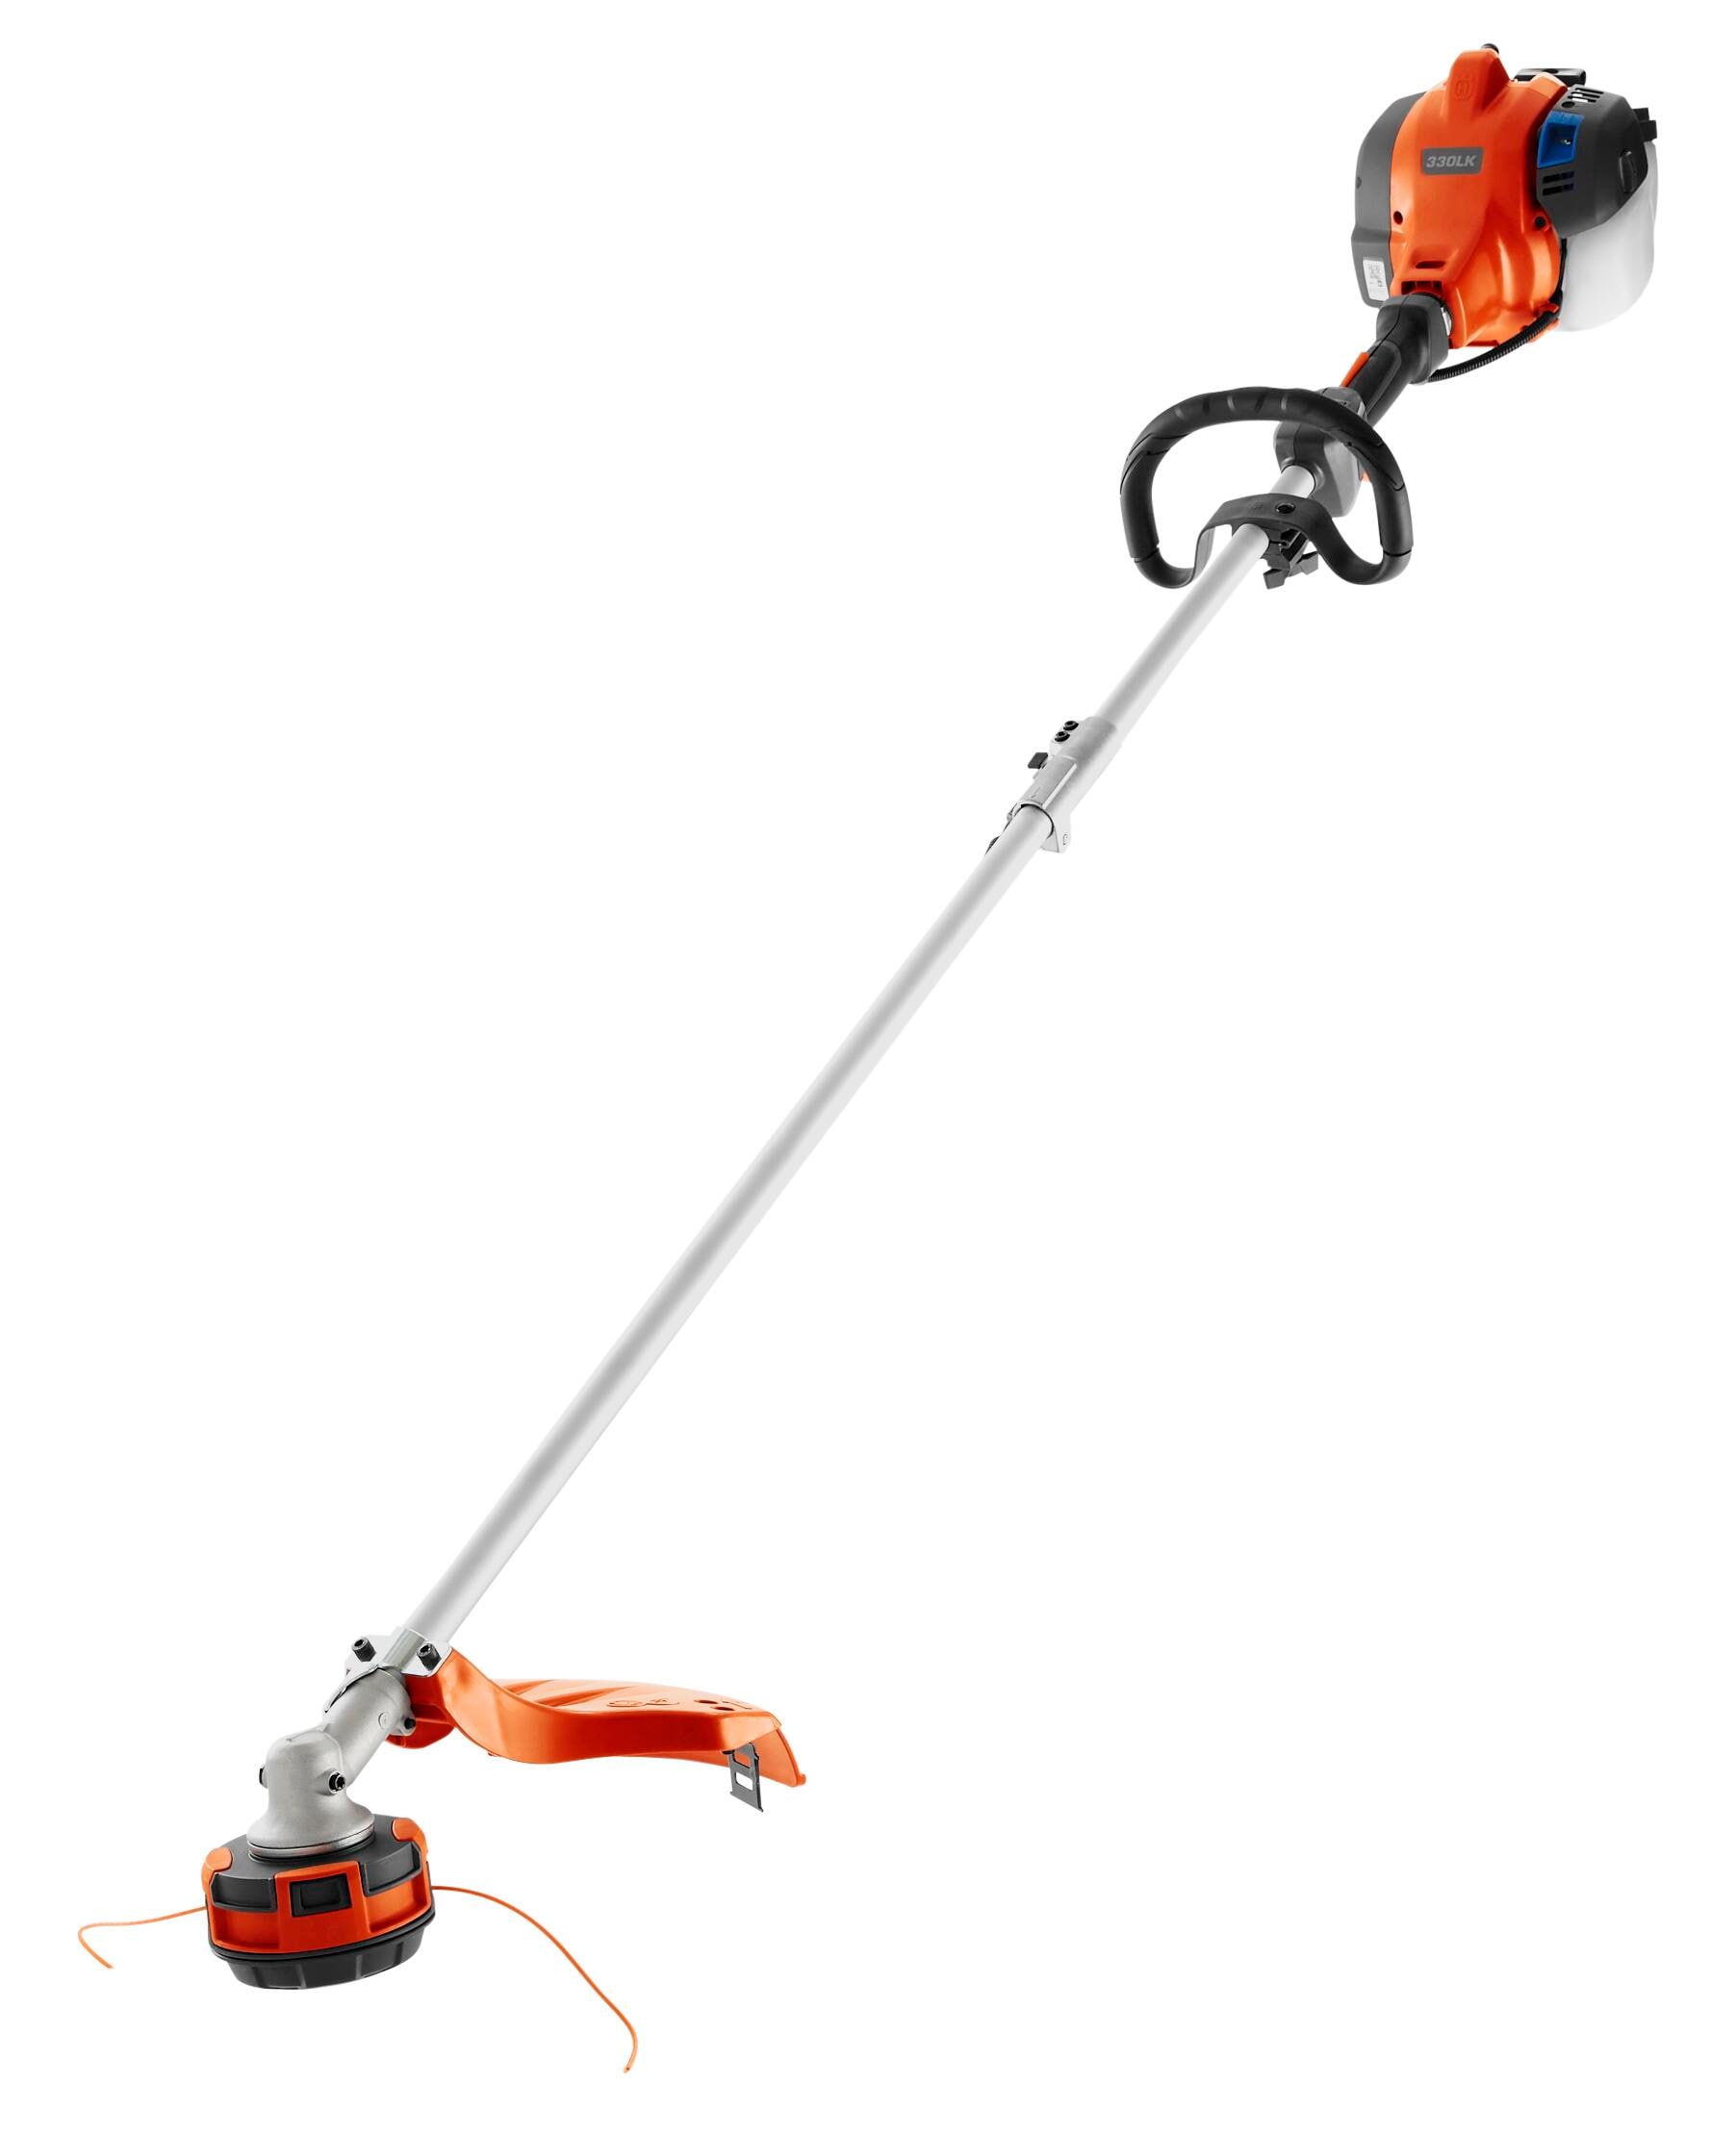 stor tung støvle Husqvarna 28-cc 2-cycle 20-in Straight Gas String Trimmer with Edger  Conversion Capable in the String Trimmers department at Lowes.com